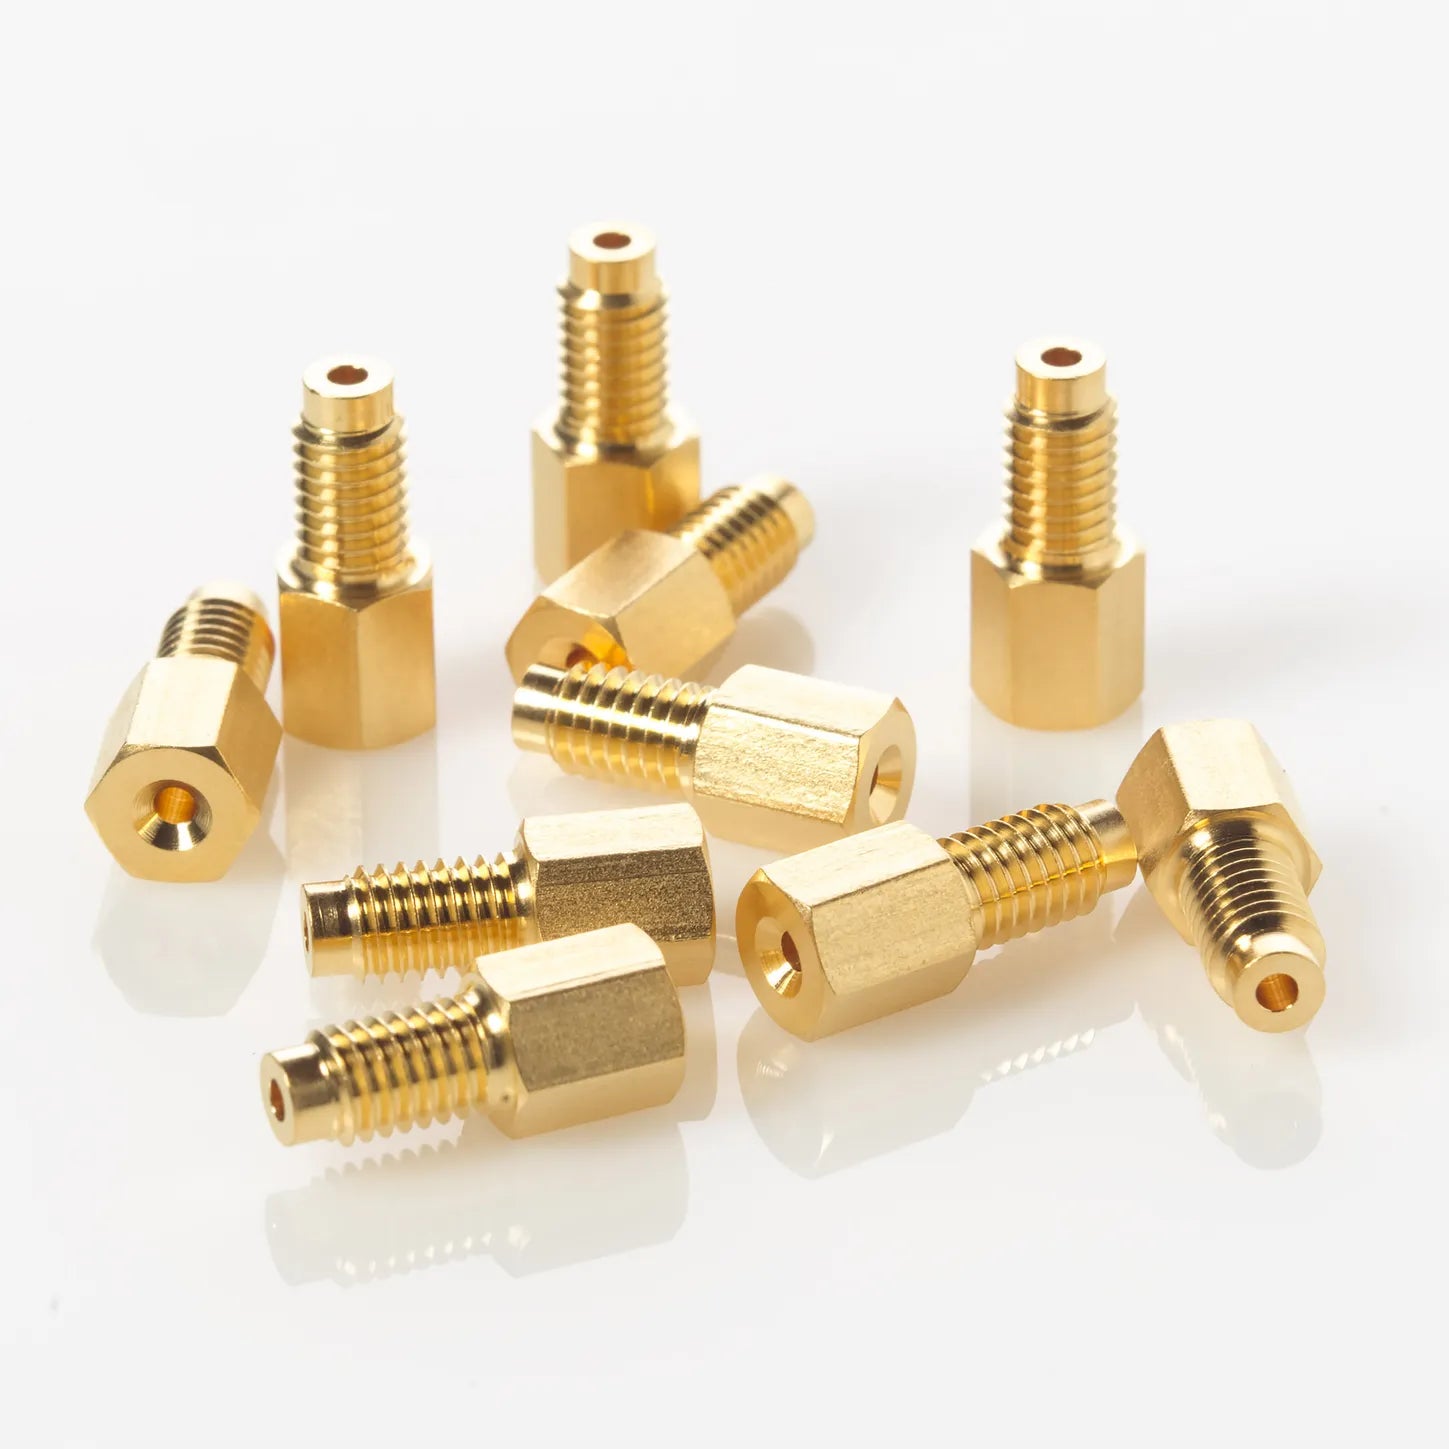 Screw, Comp.,10-32, 304SS, (Gold-Plated), 10/pk, Comparable to Waters # 700002645